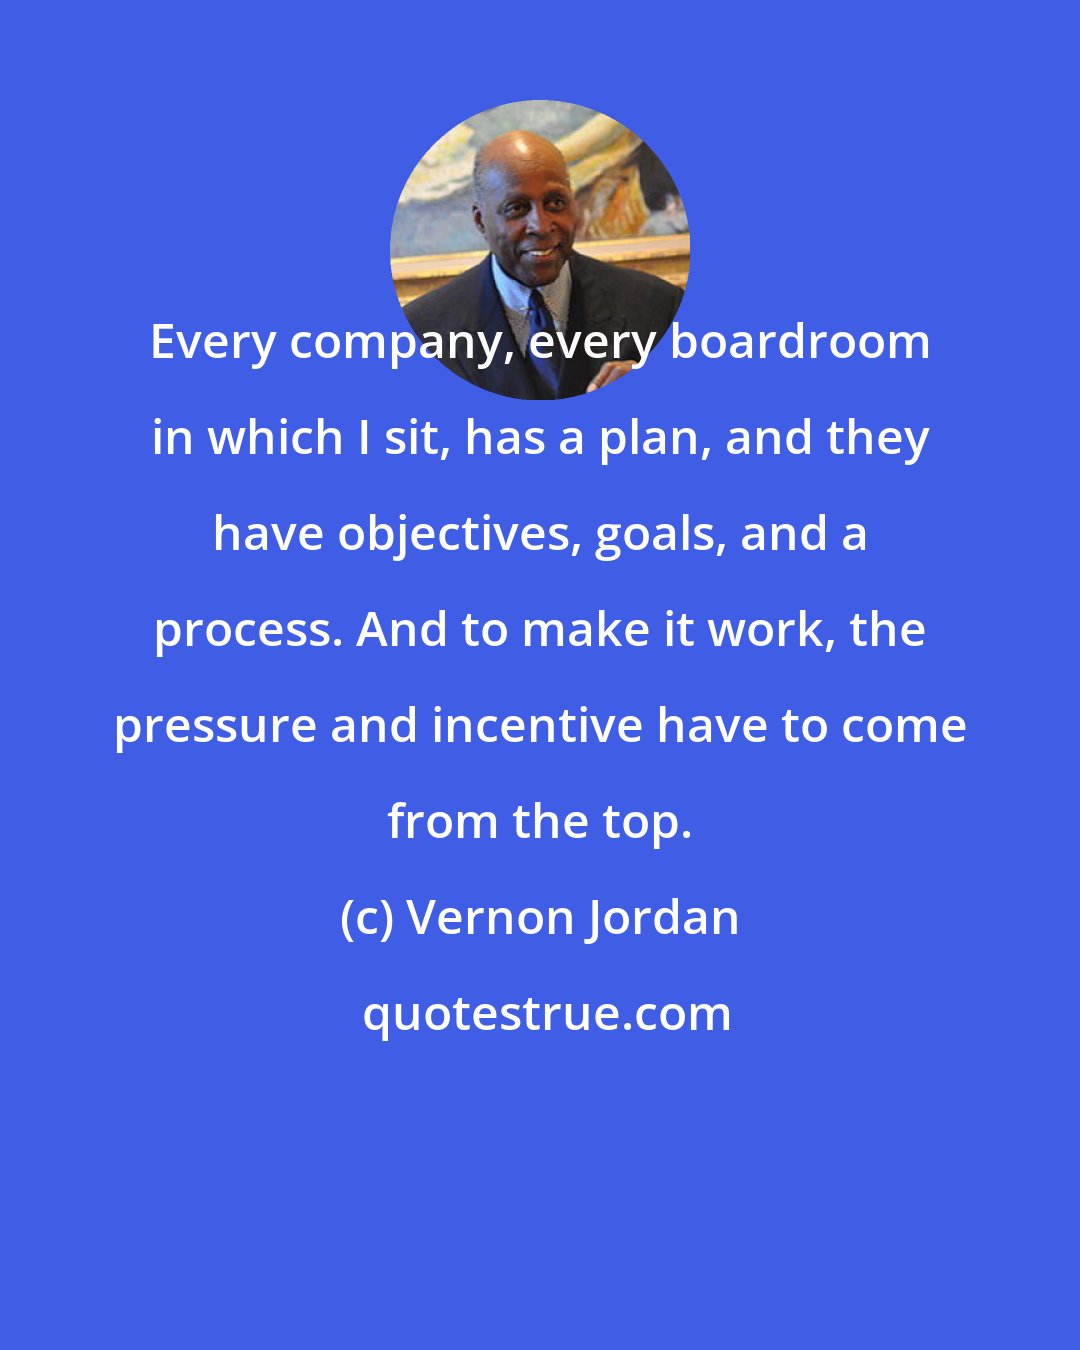 Vernon Jordan: Every company, every boardroom in which I sit, has a plan, and they have objectives, goals, and a process. And to make it work, the pressure and incentive have to come from the top.